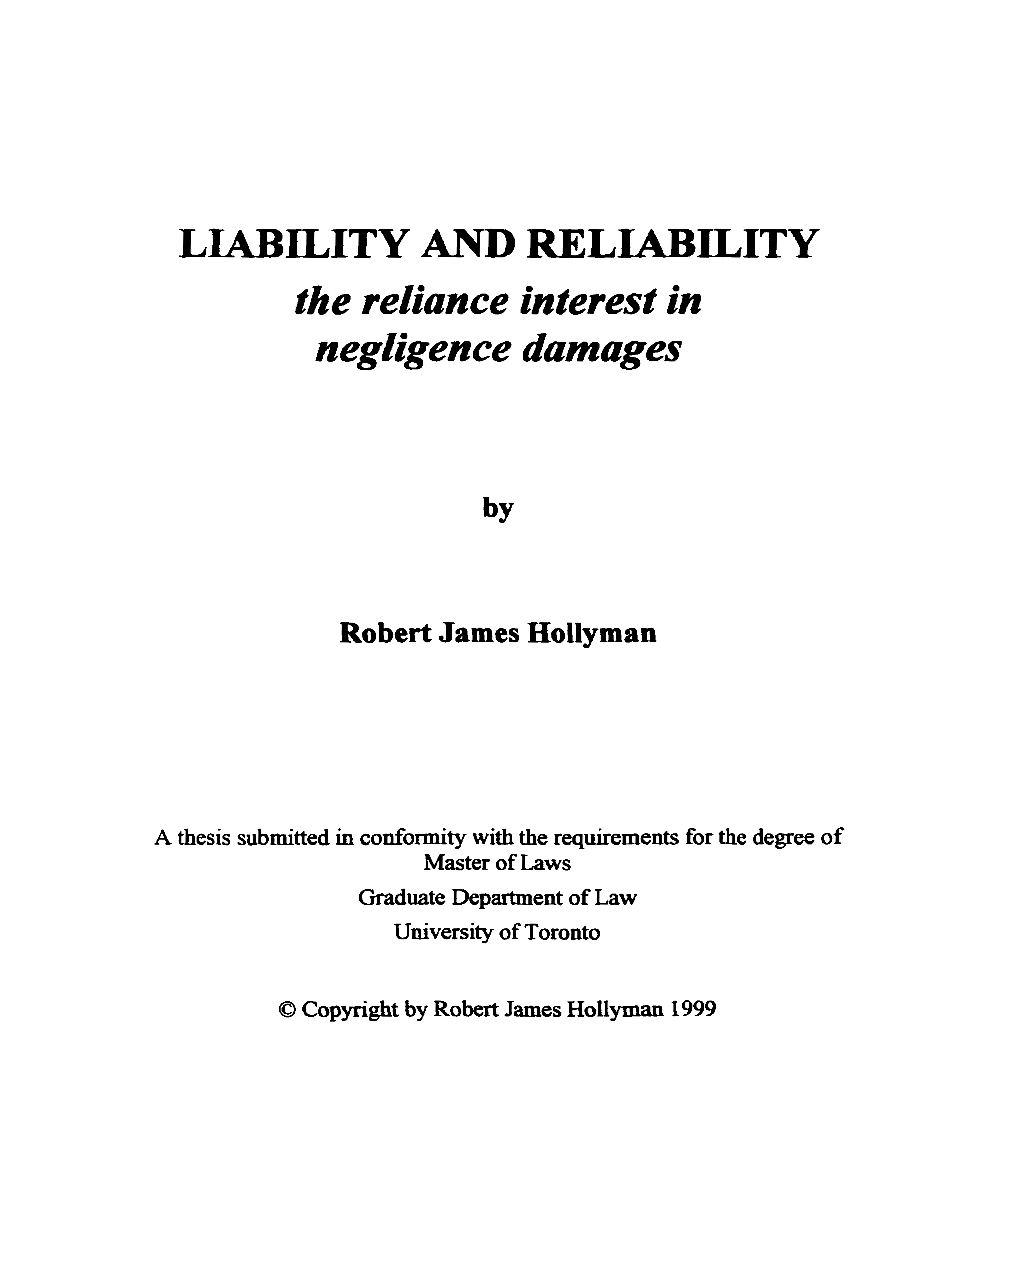 The Reliance Interest in Negligence Damages